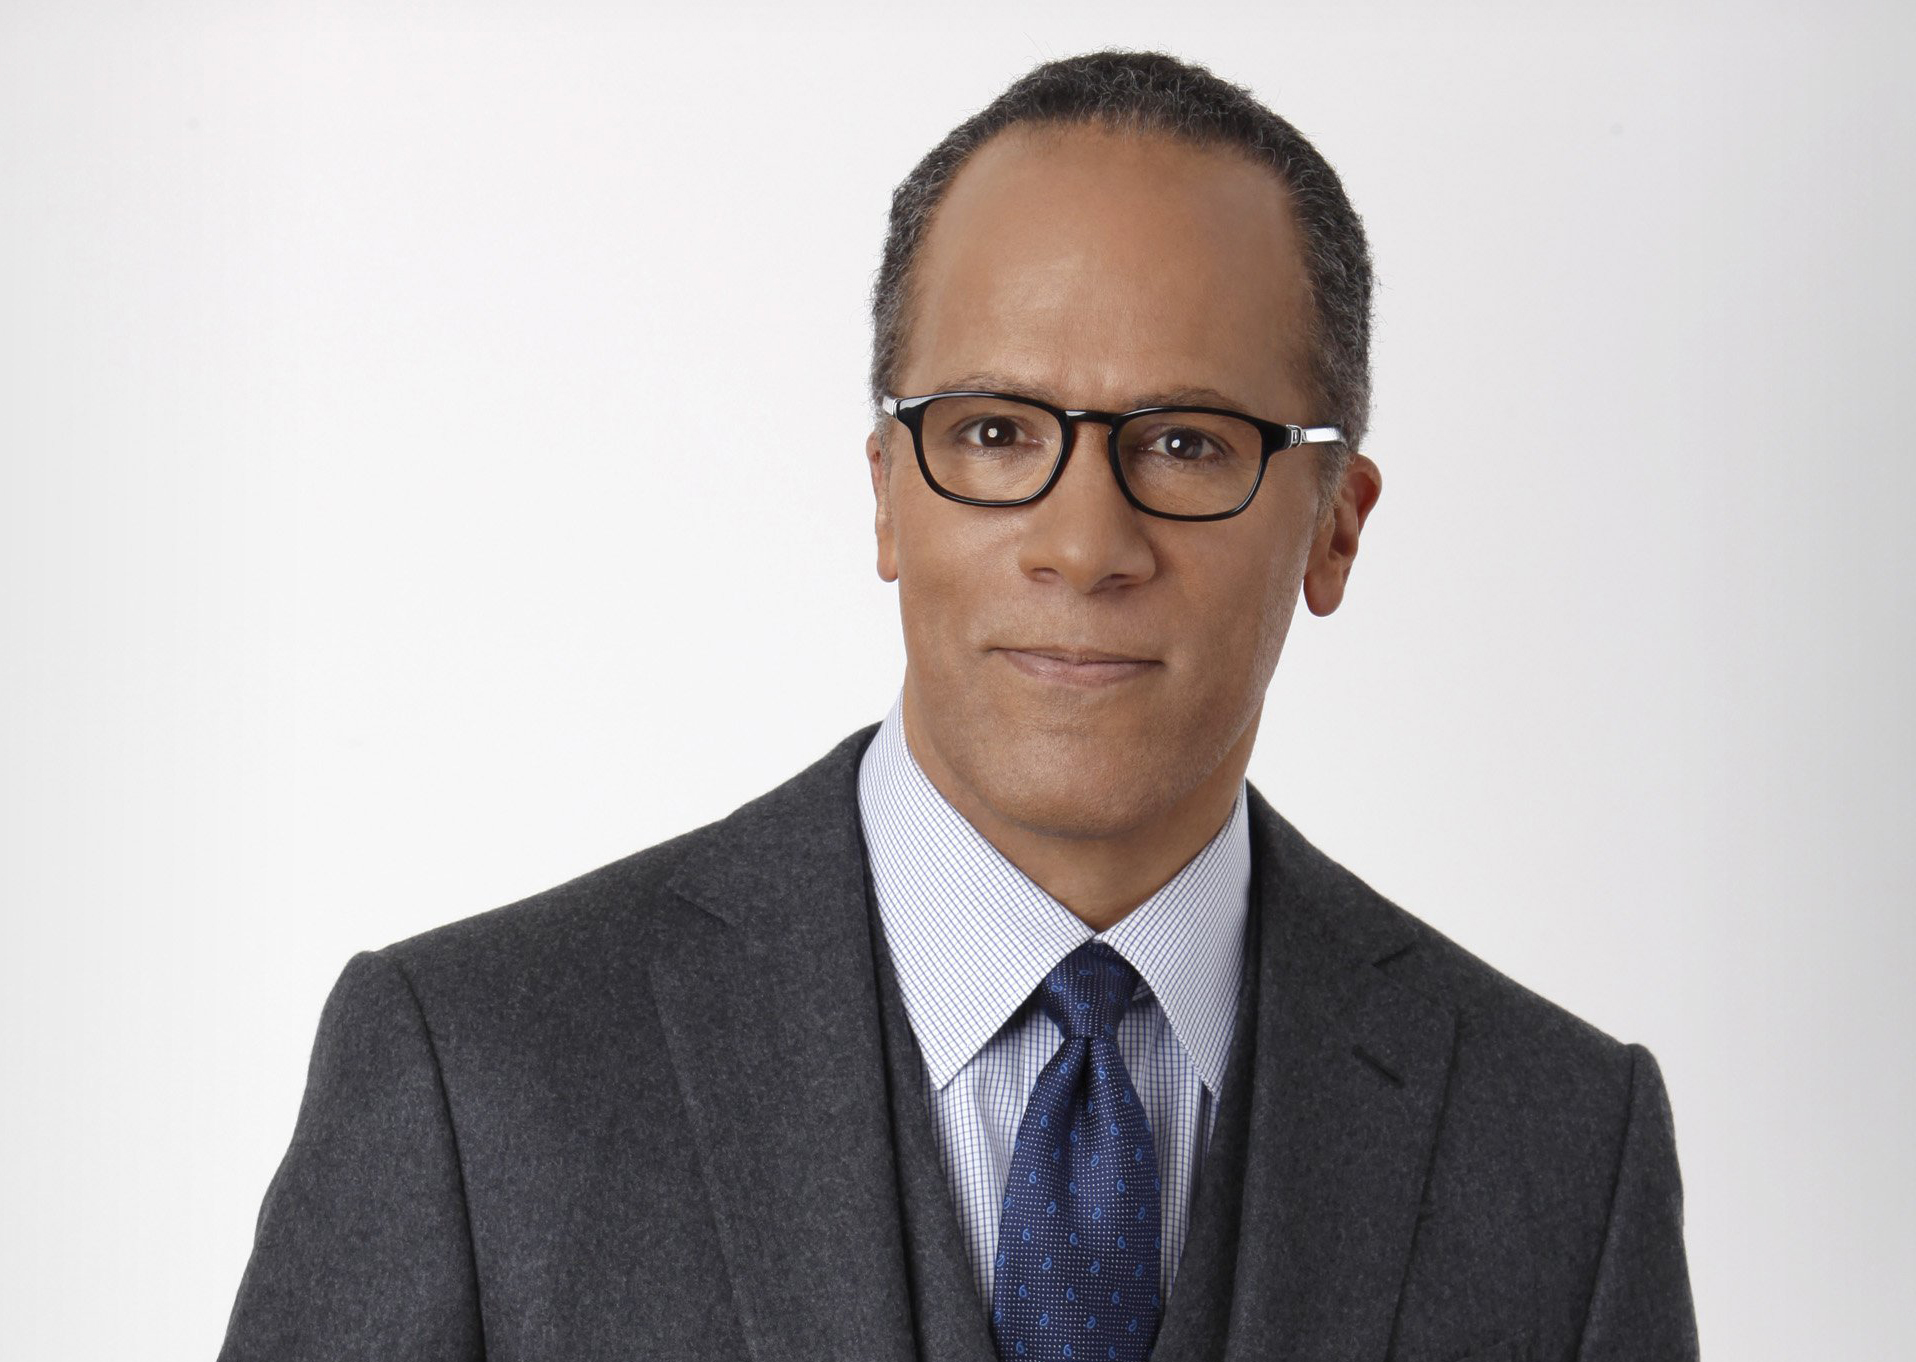 NBC NEWS - ANCHORS-CORRESPONDENTS -- Pictured: Lester Holt, Anchor “Dateline NBC,” Anchor “NBC Nightly News, Weekend Edition,” Co-Host “Today, Weekend Edition” -- (Photo by: Heidi Gutman/NBC)